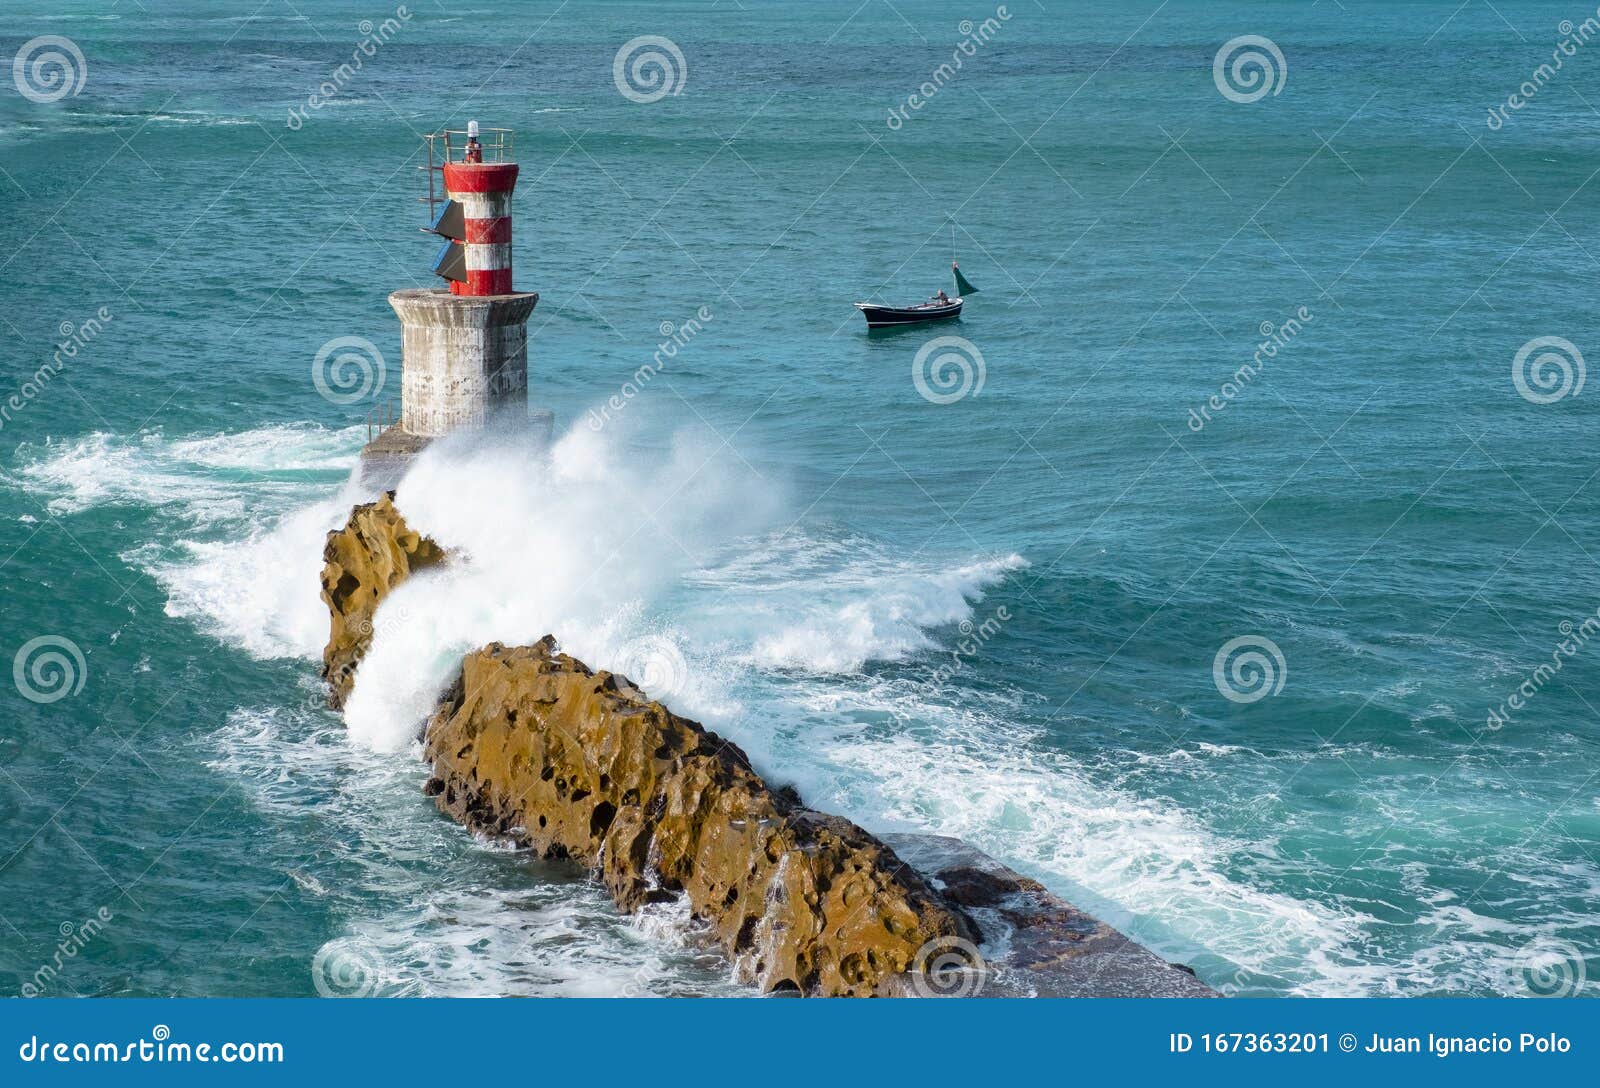 waves, fishing boat and lighthouse in the bay of pasaia, euskadi